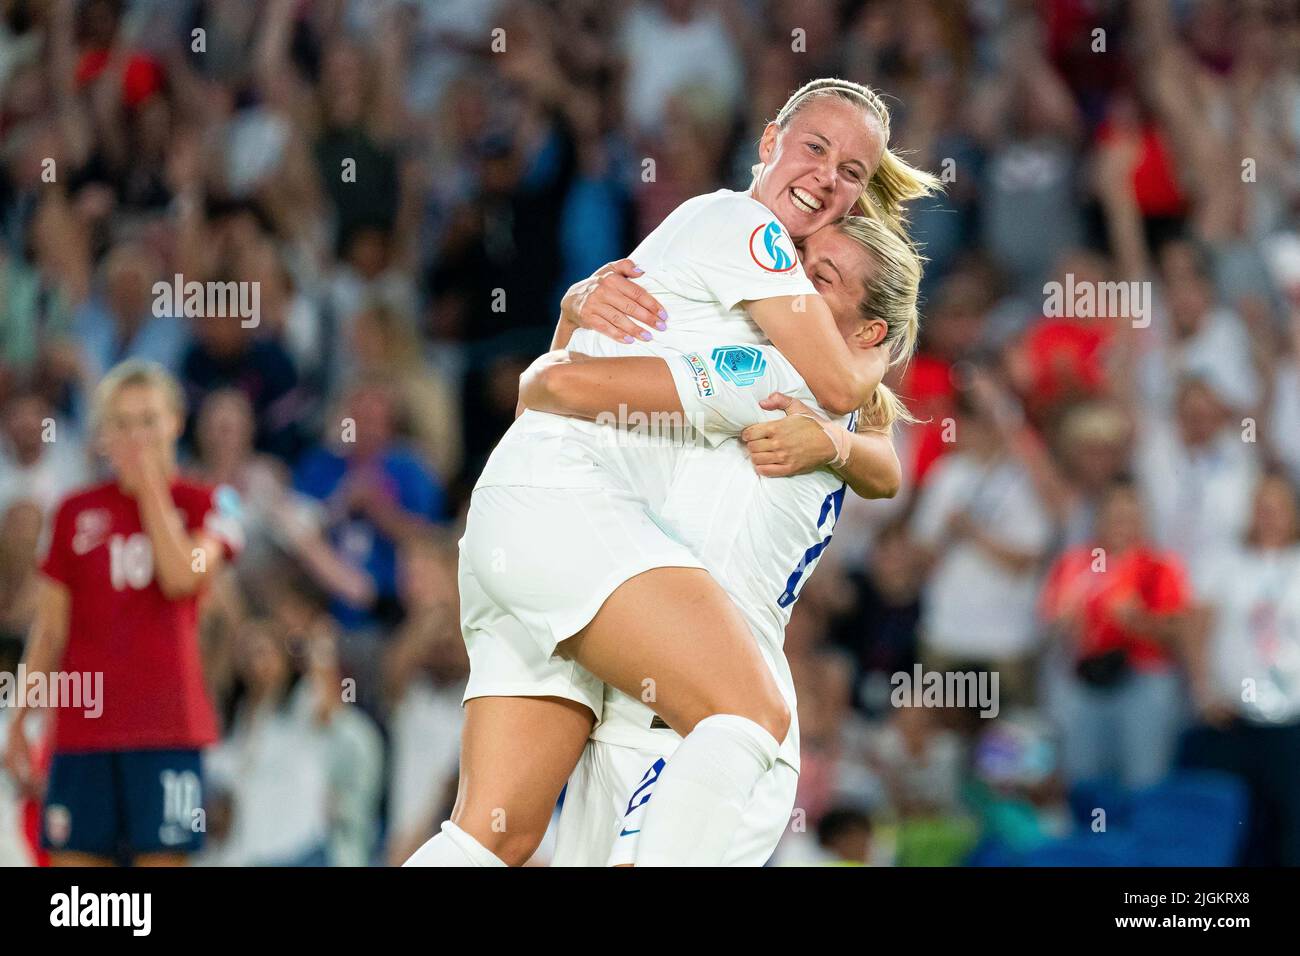 Brighton, UK. 11th July, 2022. Alessia Russo (23 England) celebrates scoring Englands seventh (7-0) during the UEFA Womens Euro 2022 football match between England and Norway at the Community Stadium in Brighton, England. and during the UEFA Womens Euro 2022 football match between England and Norway at the Community Stadium in Brighton, England. (Foto: Sam Mallia/Sports Press Photo/C - ONE HOUR DEADLINE - ONLY ACTIVATE FTP IF IMAGES LESS THAN ONE HOUR OLD - Alamy) Credit: SPP Sport Press Photo. /Alamy Live News Stock Photo